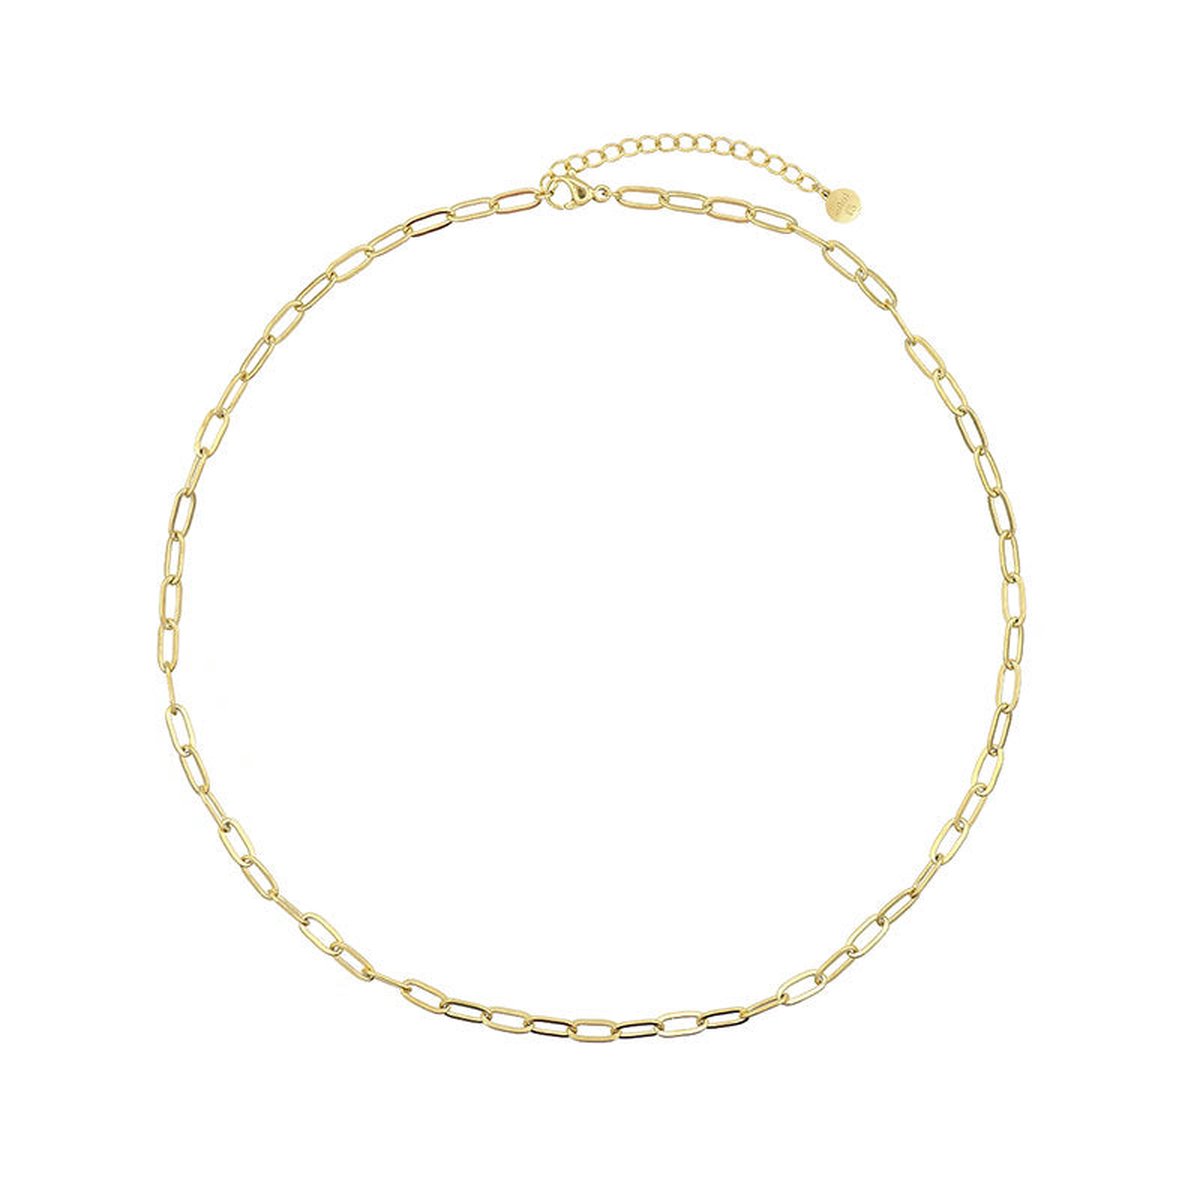 Mint15 Ketting 'Chain Necklace' - Goud RVS/Stainless Steel